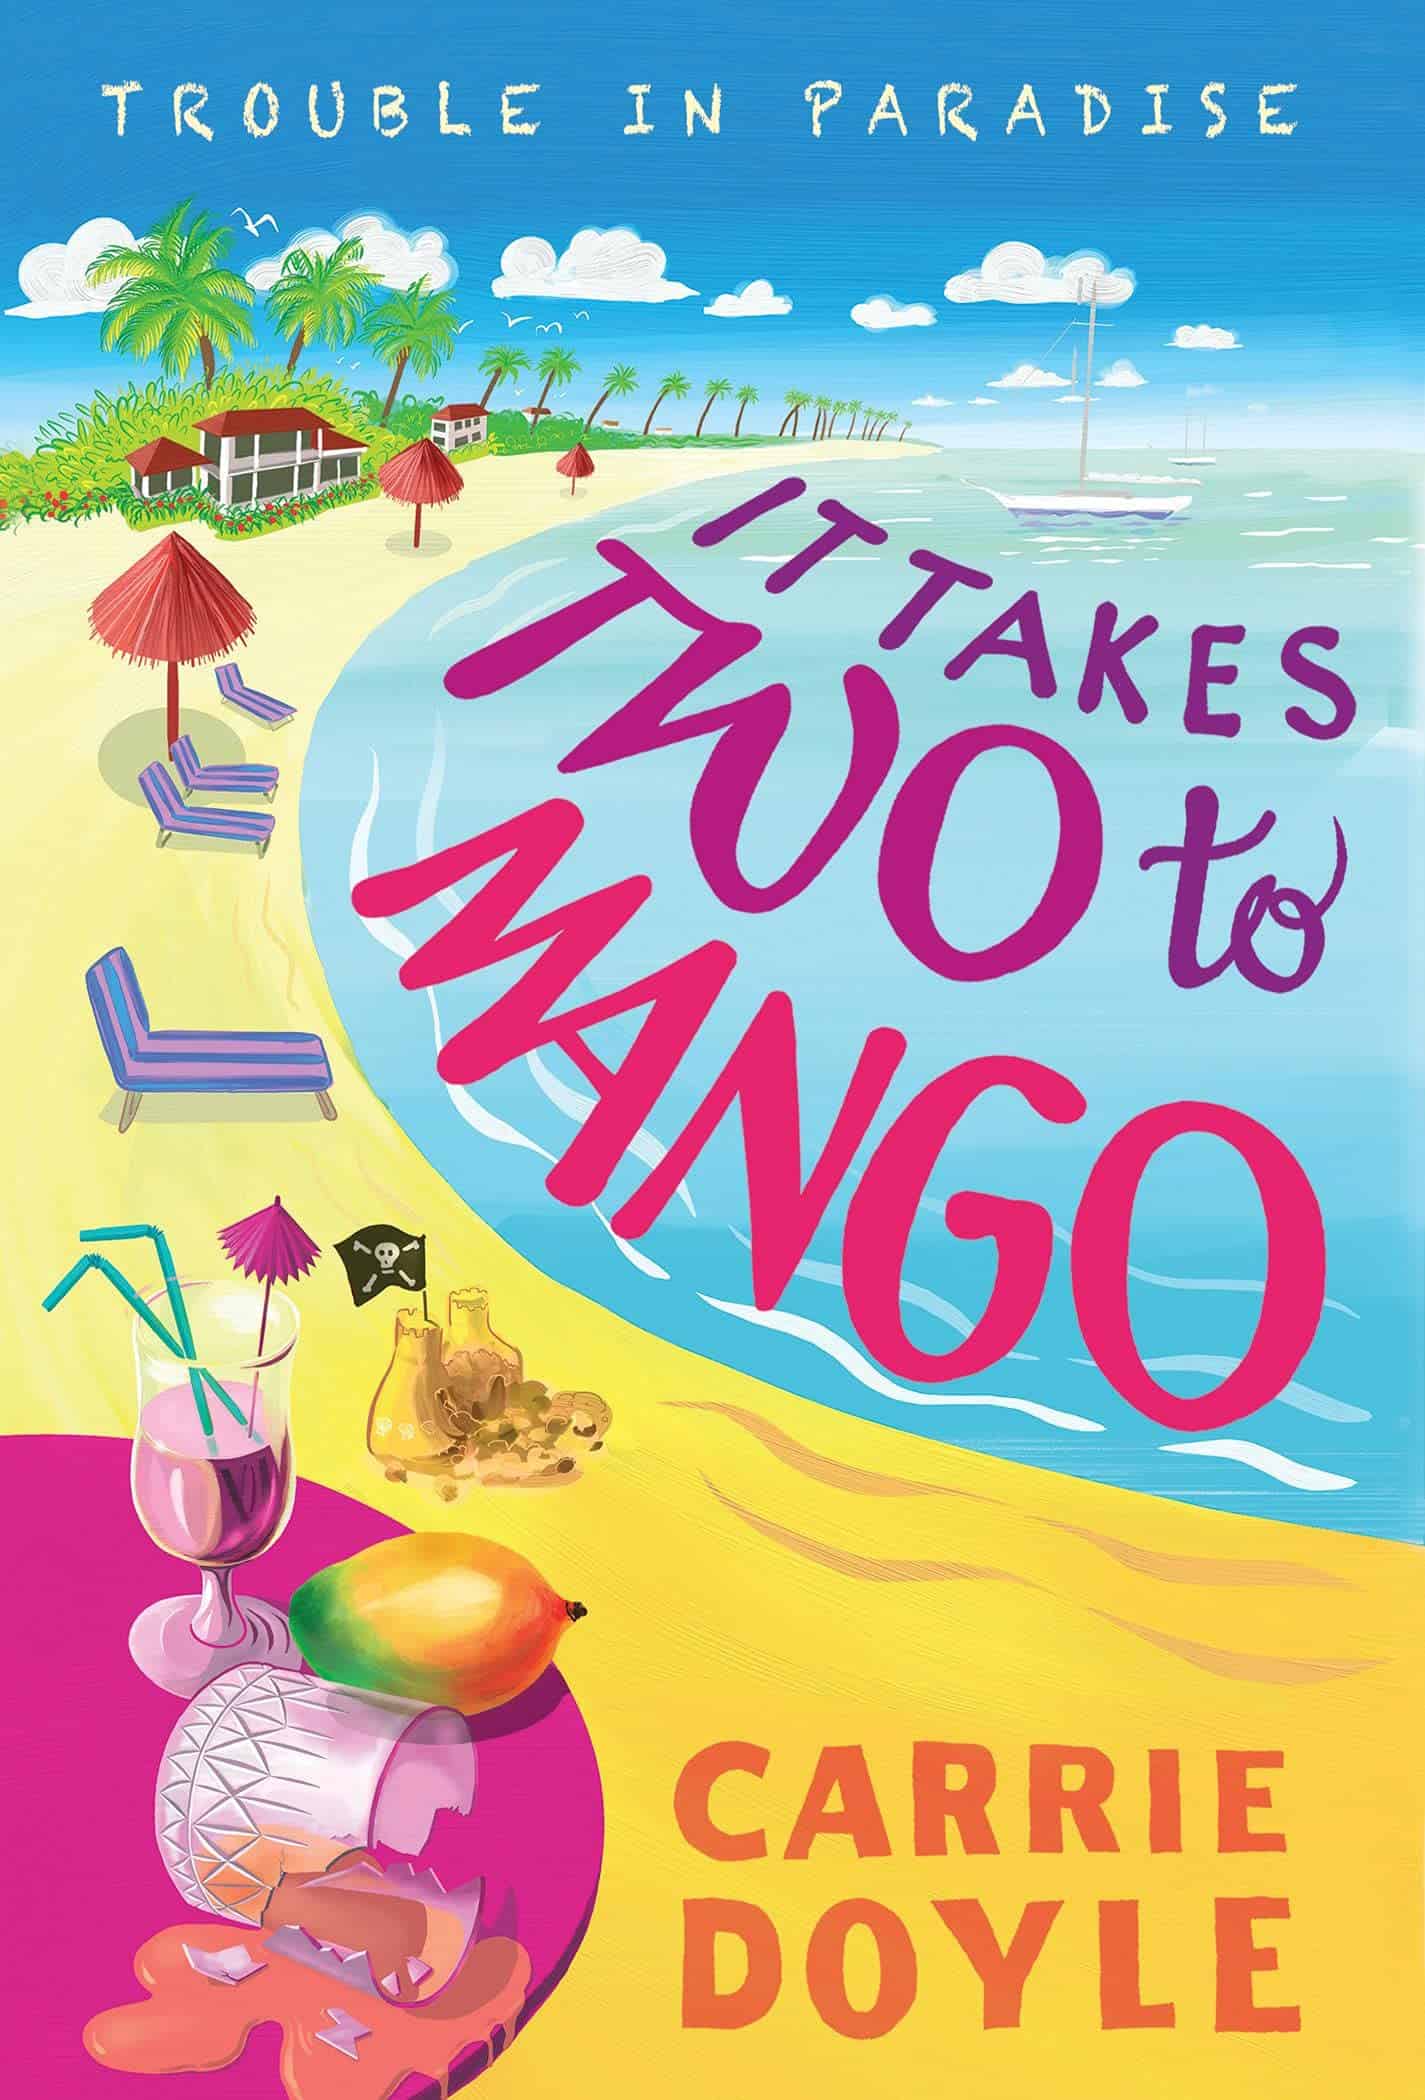 It Takes Two to Mango by Carrie Doyle